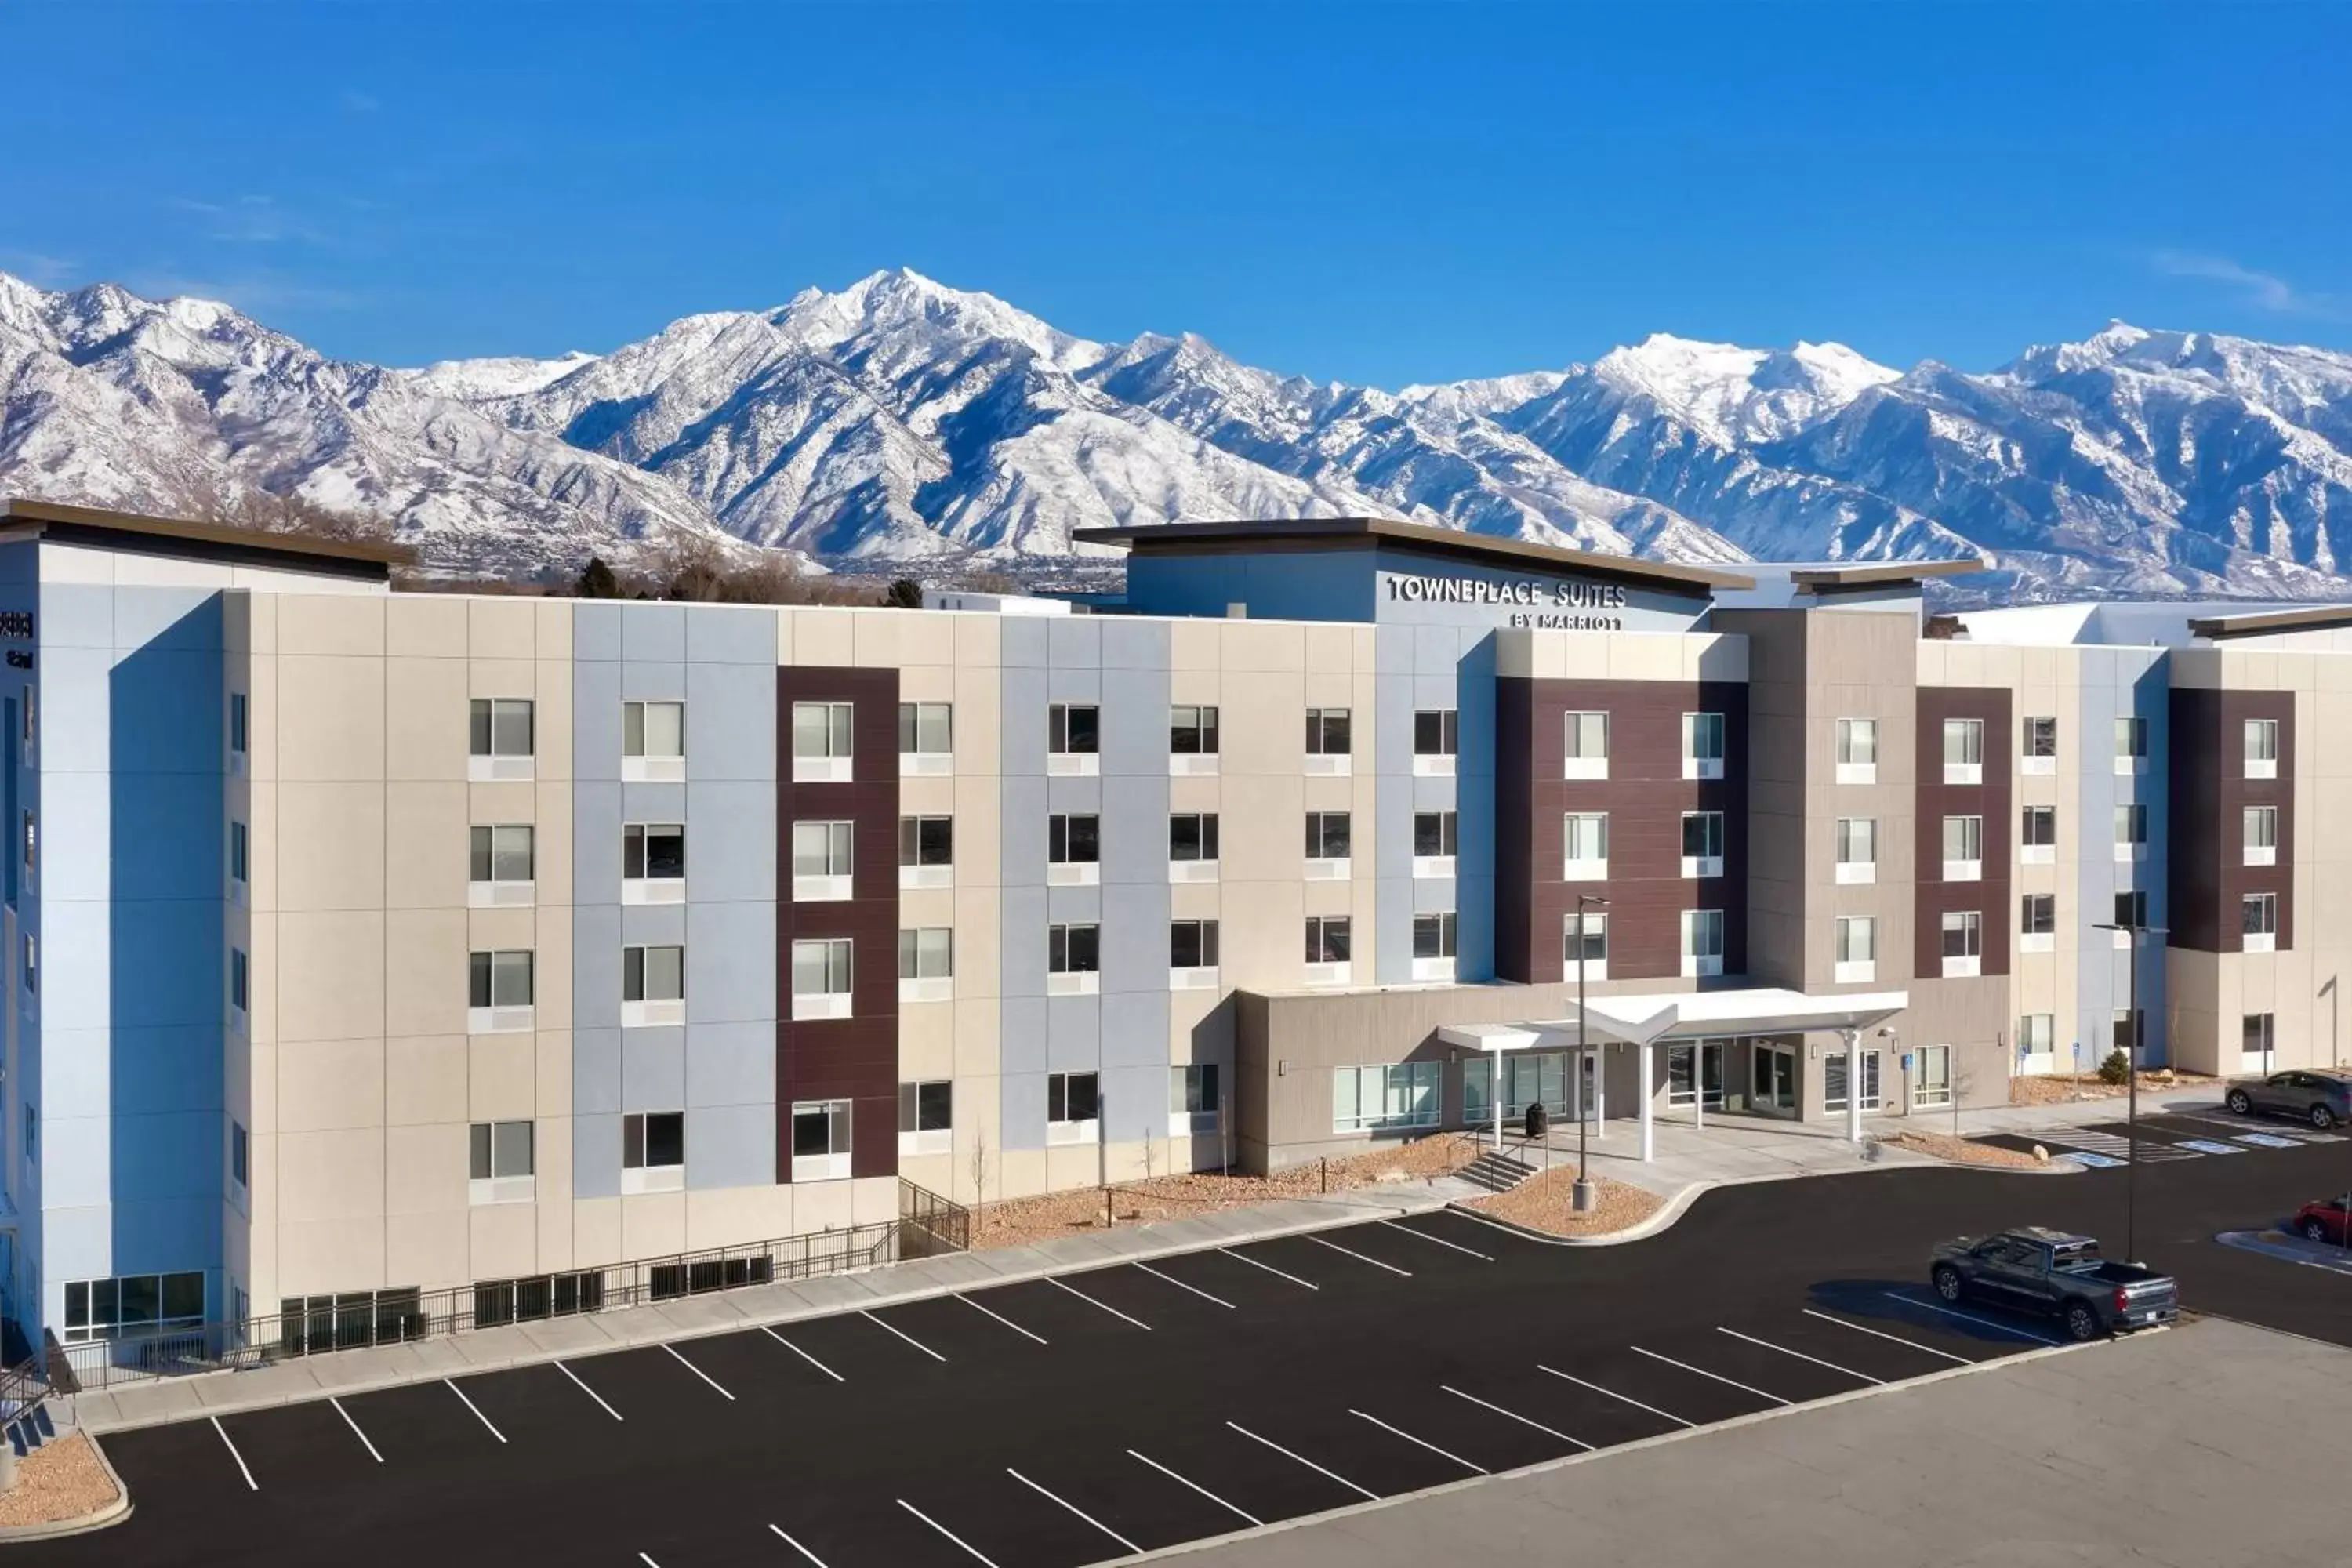 Property Building in TownePlace Suites Salt Lake City Murray